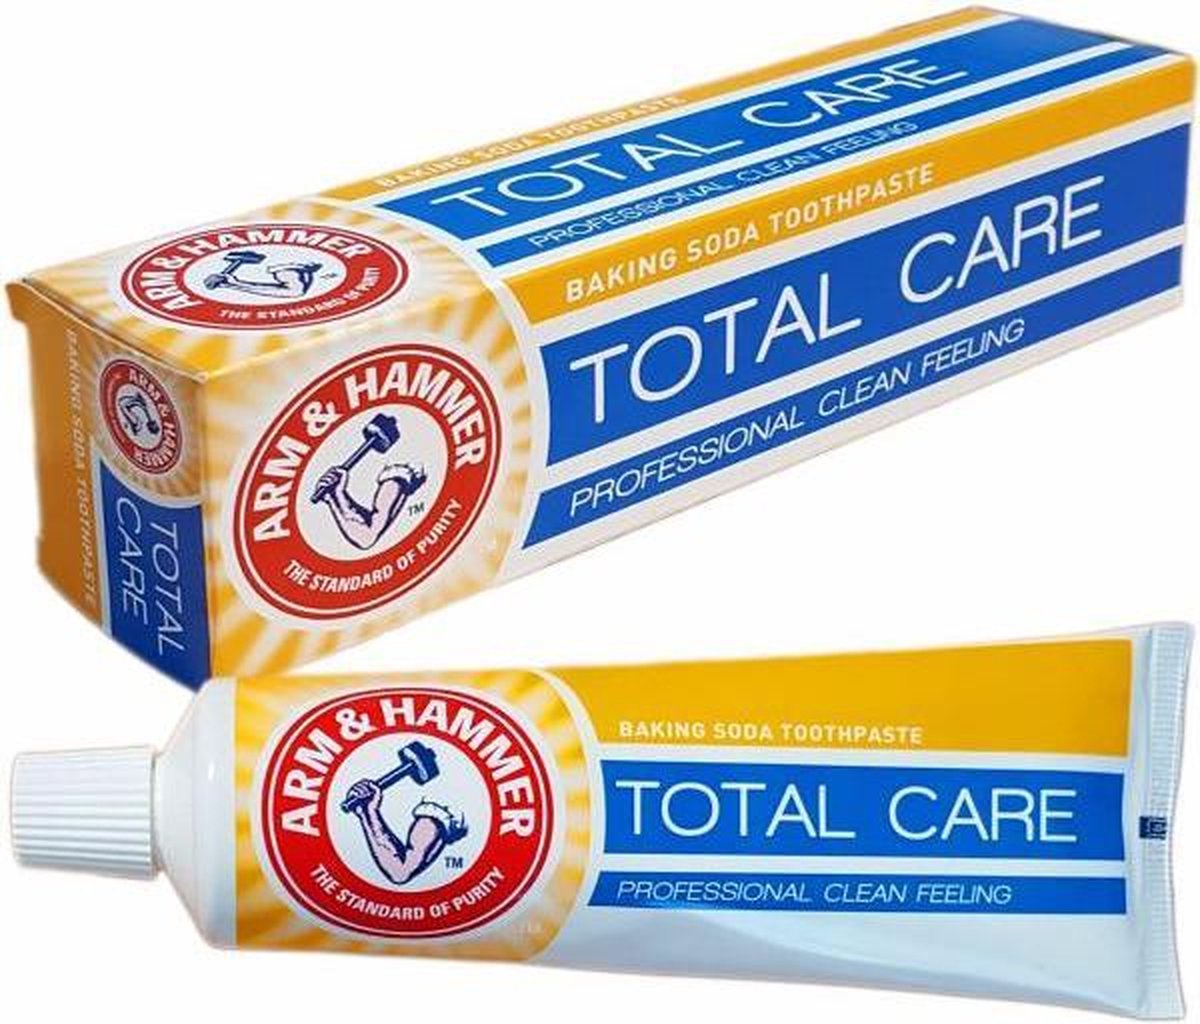 Arm & Hammer Total Care Baking Soda Toothpaste | bol.com